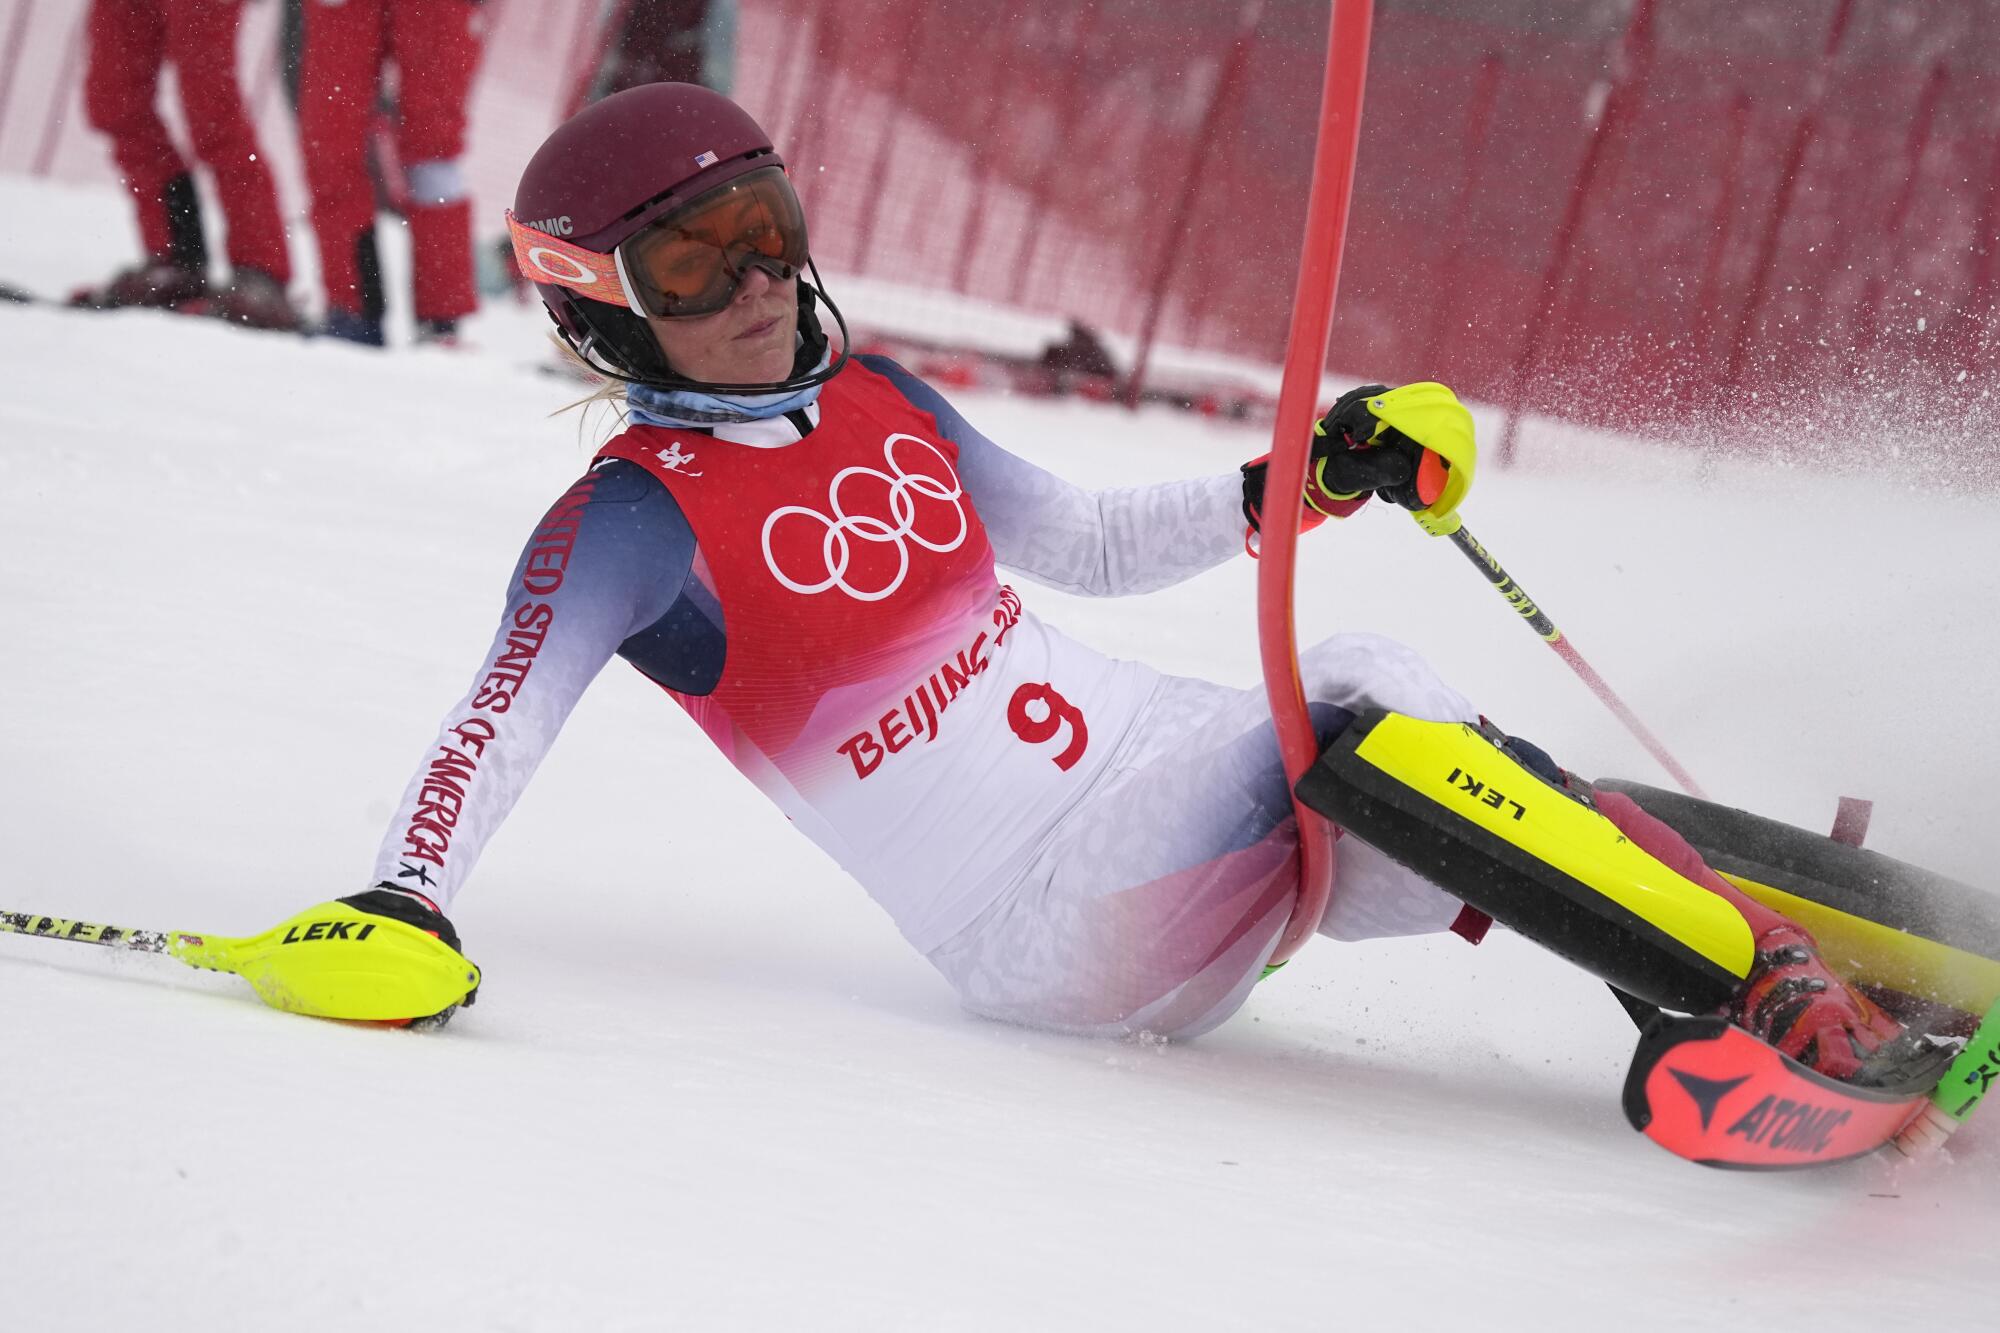 Mikaela Shiffrin of the U.S. crashes out during the women's combined slalom Thursday at the 2022 Winter Olympics.